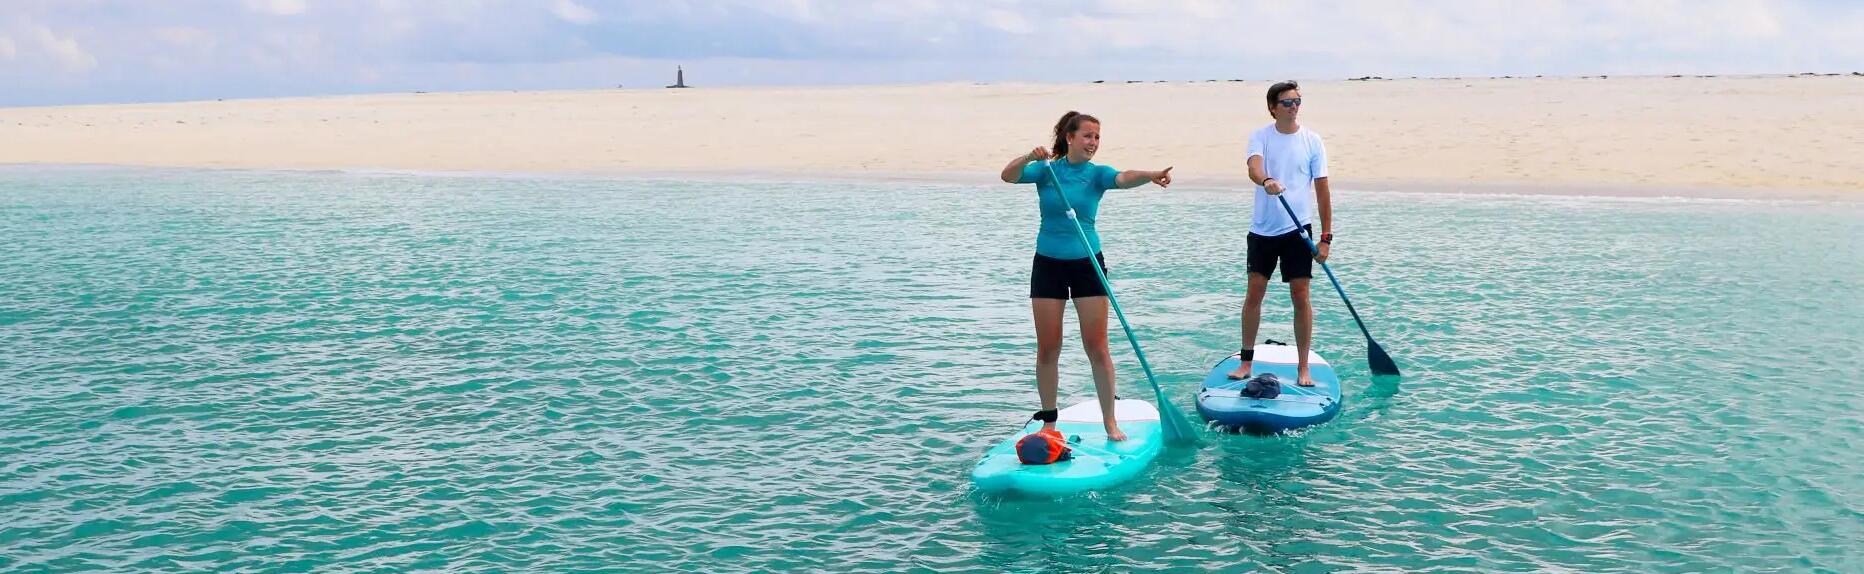 HOW TO STAND-UP PADDLE 